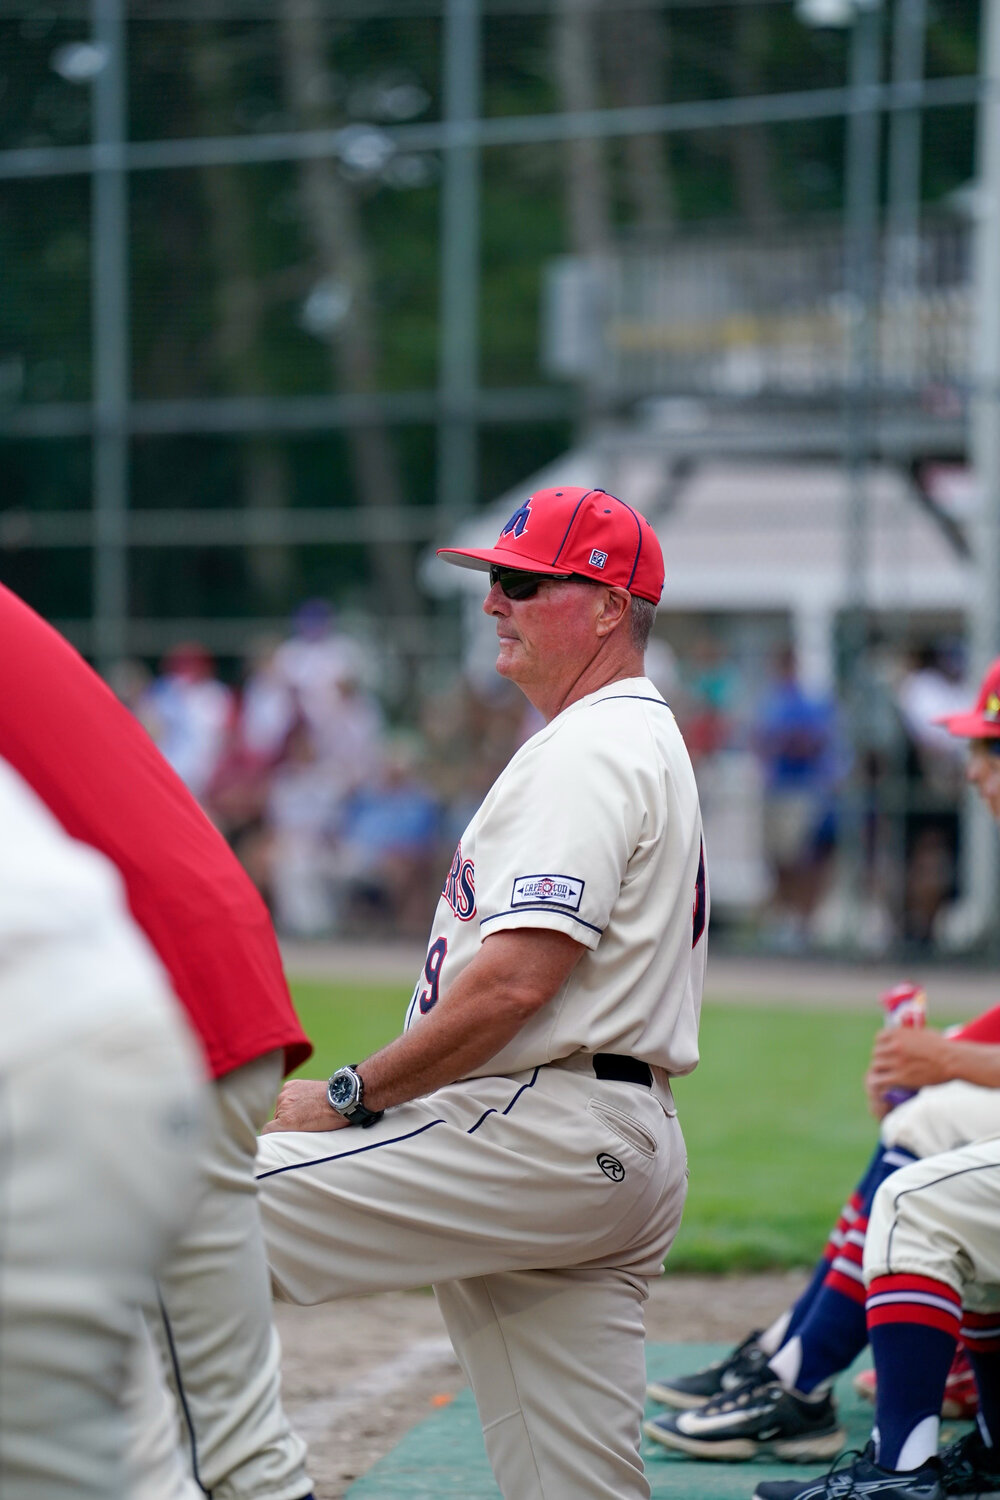 Steve Englert has served as manager of the Harwich Mariners, a member of the prestigious Cape Cod Baseball League, since 2003. Close to 20 years, Englert got an unexpected call to join the coaching staff at Manhattan College, whom he plans on returning to bench for next season.